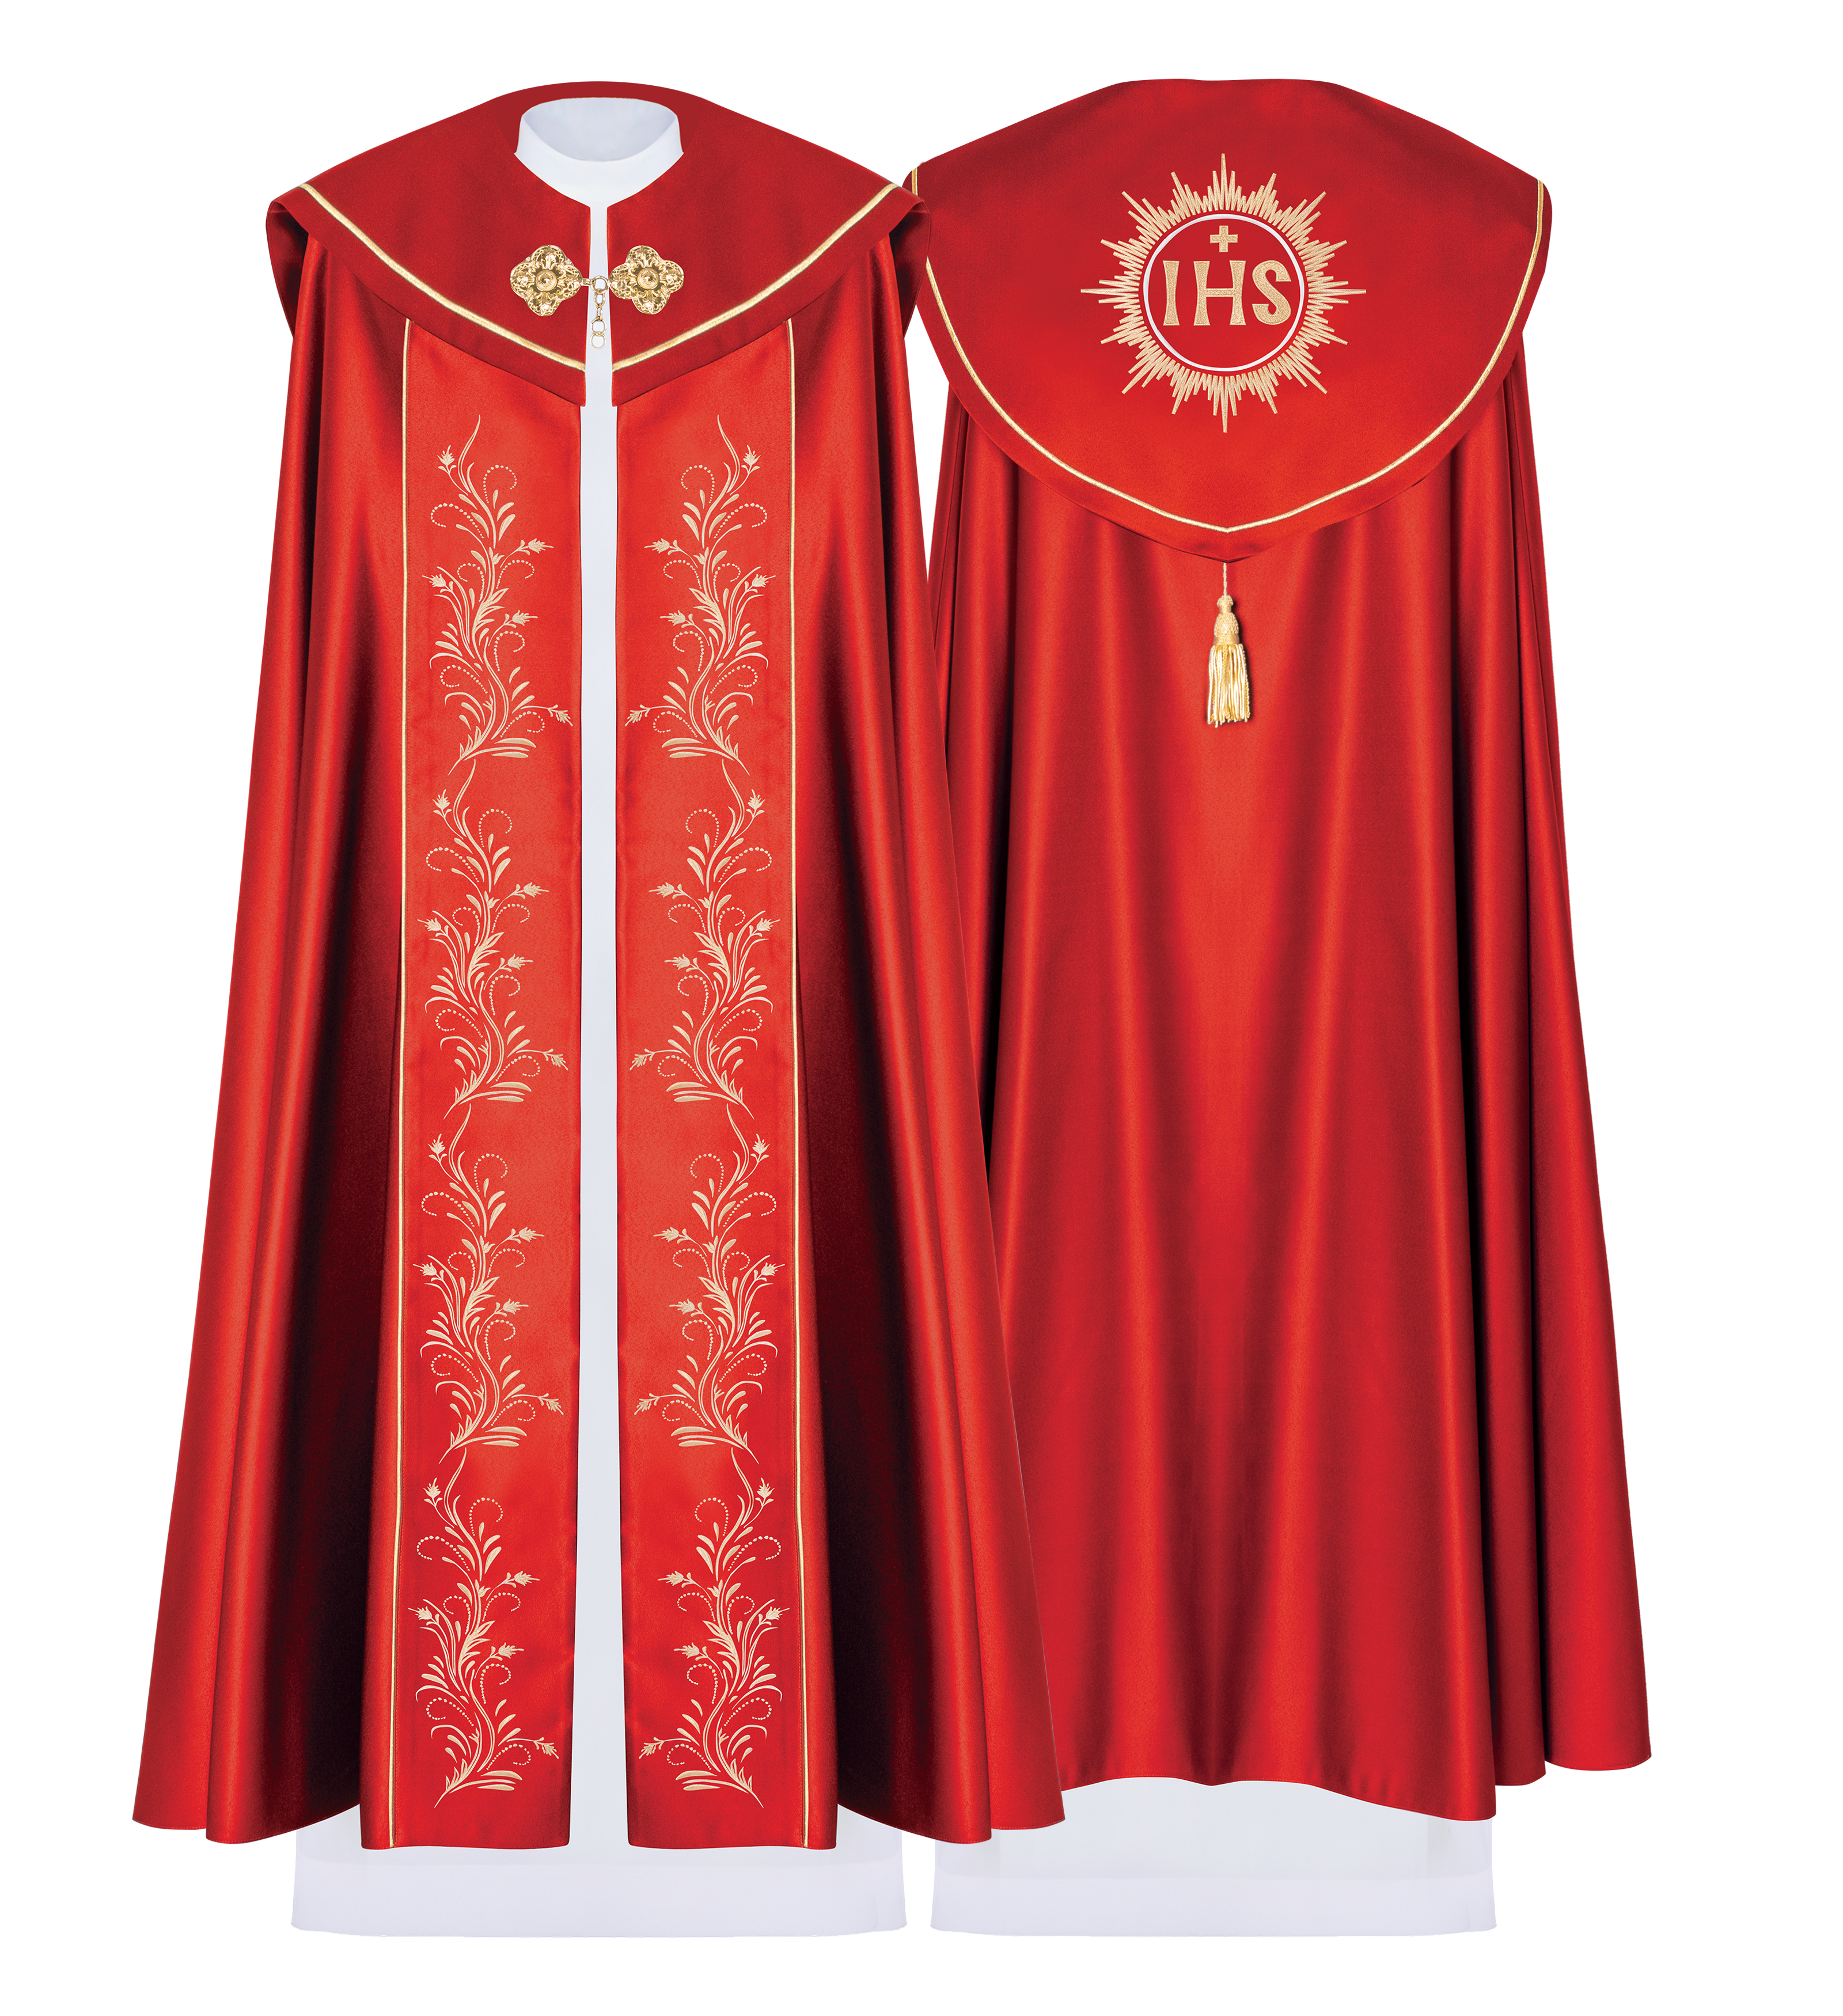 Liturgical cape embroidered with IHS motif in red